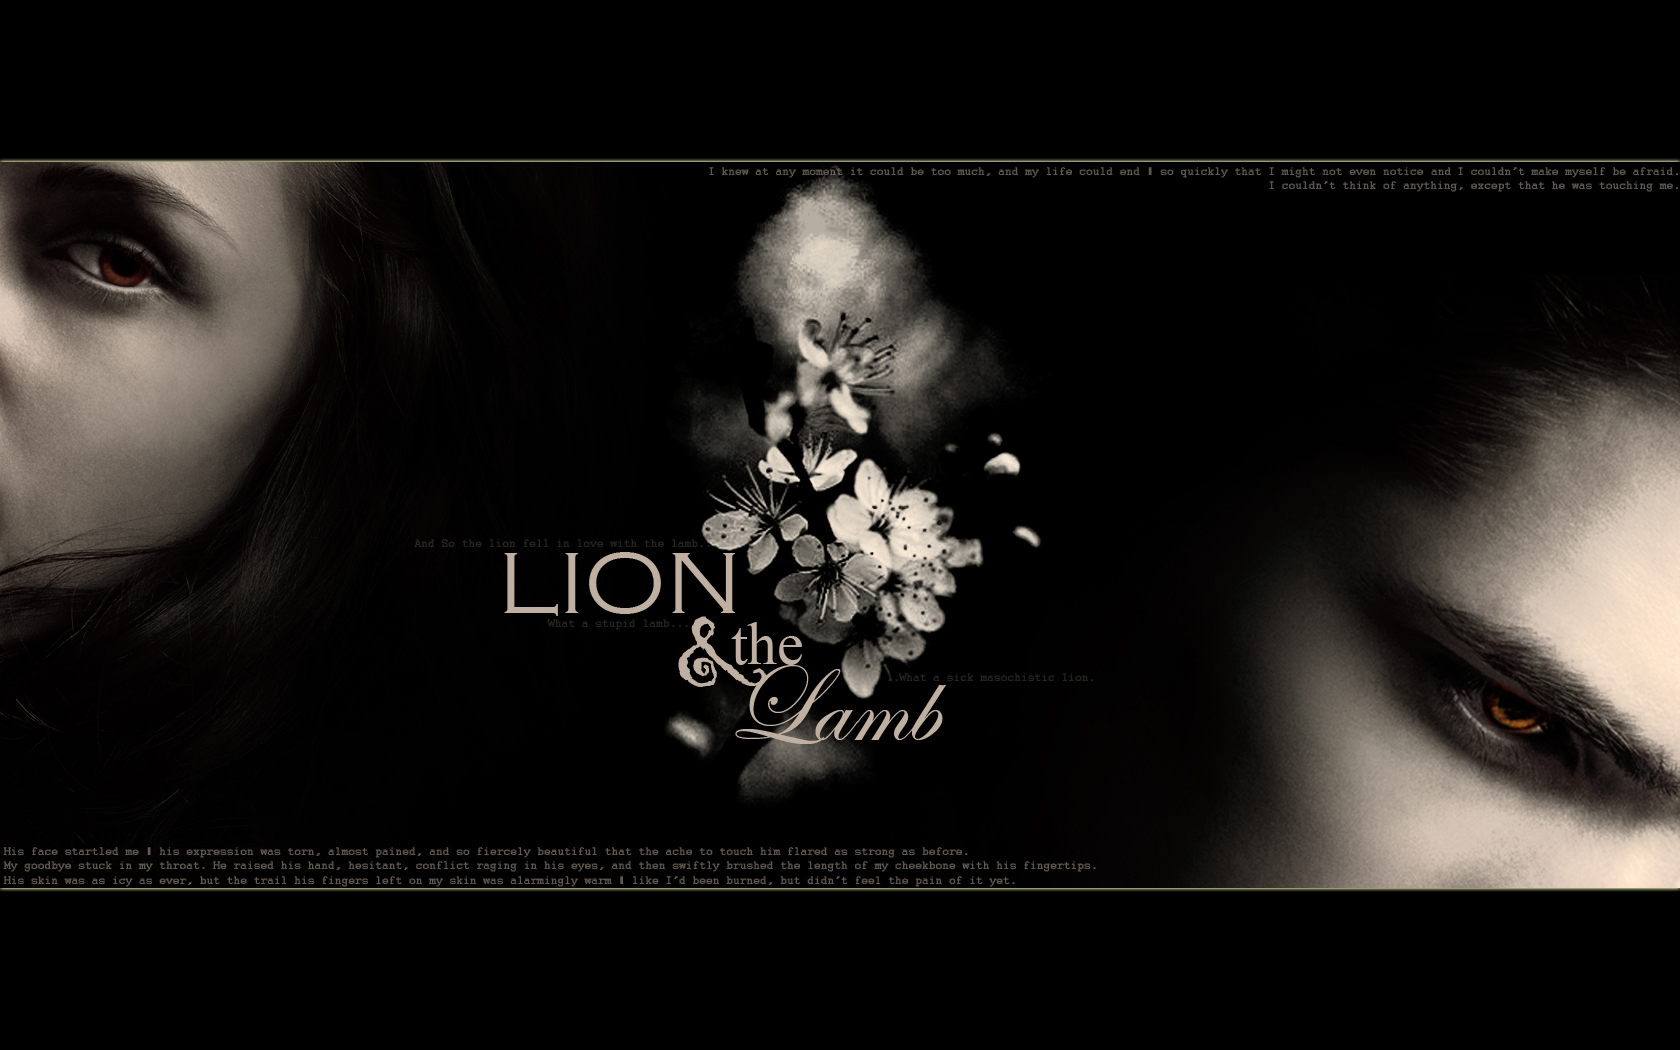 Twilight  New Moon Wallpapers - The-Lion-And-The-Lamb-twilight-series-8897480-1680-1050.jpg